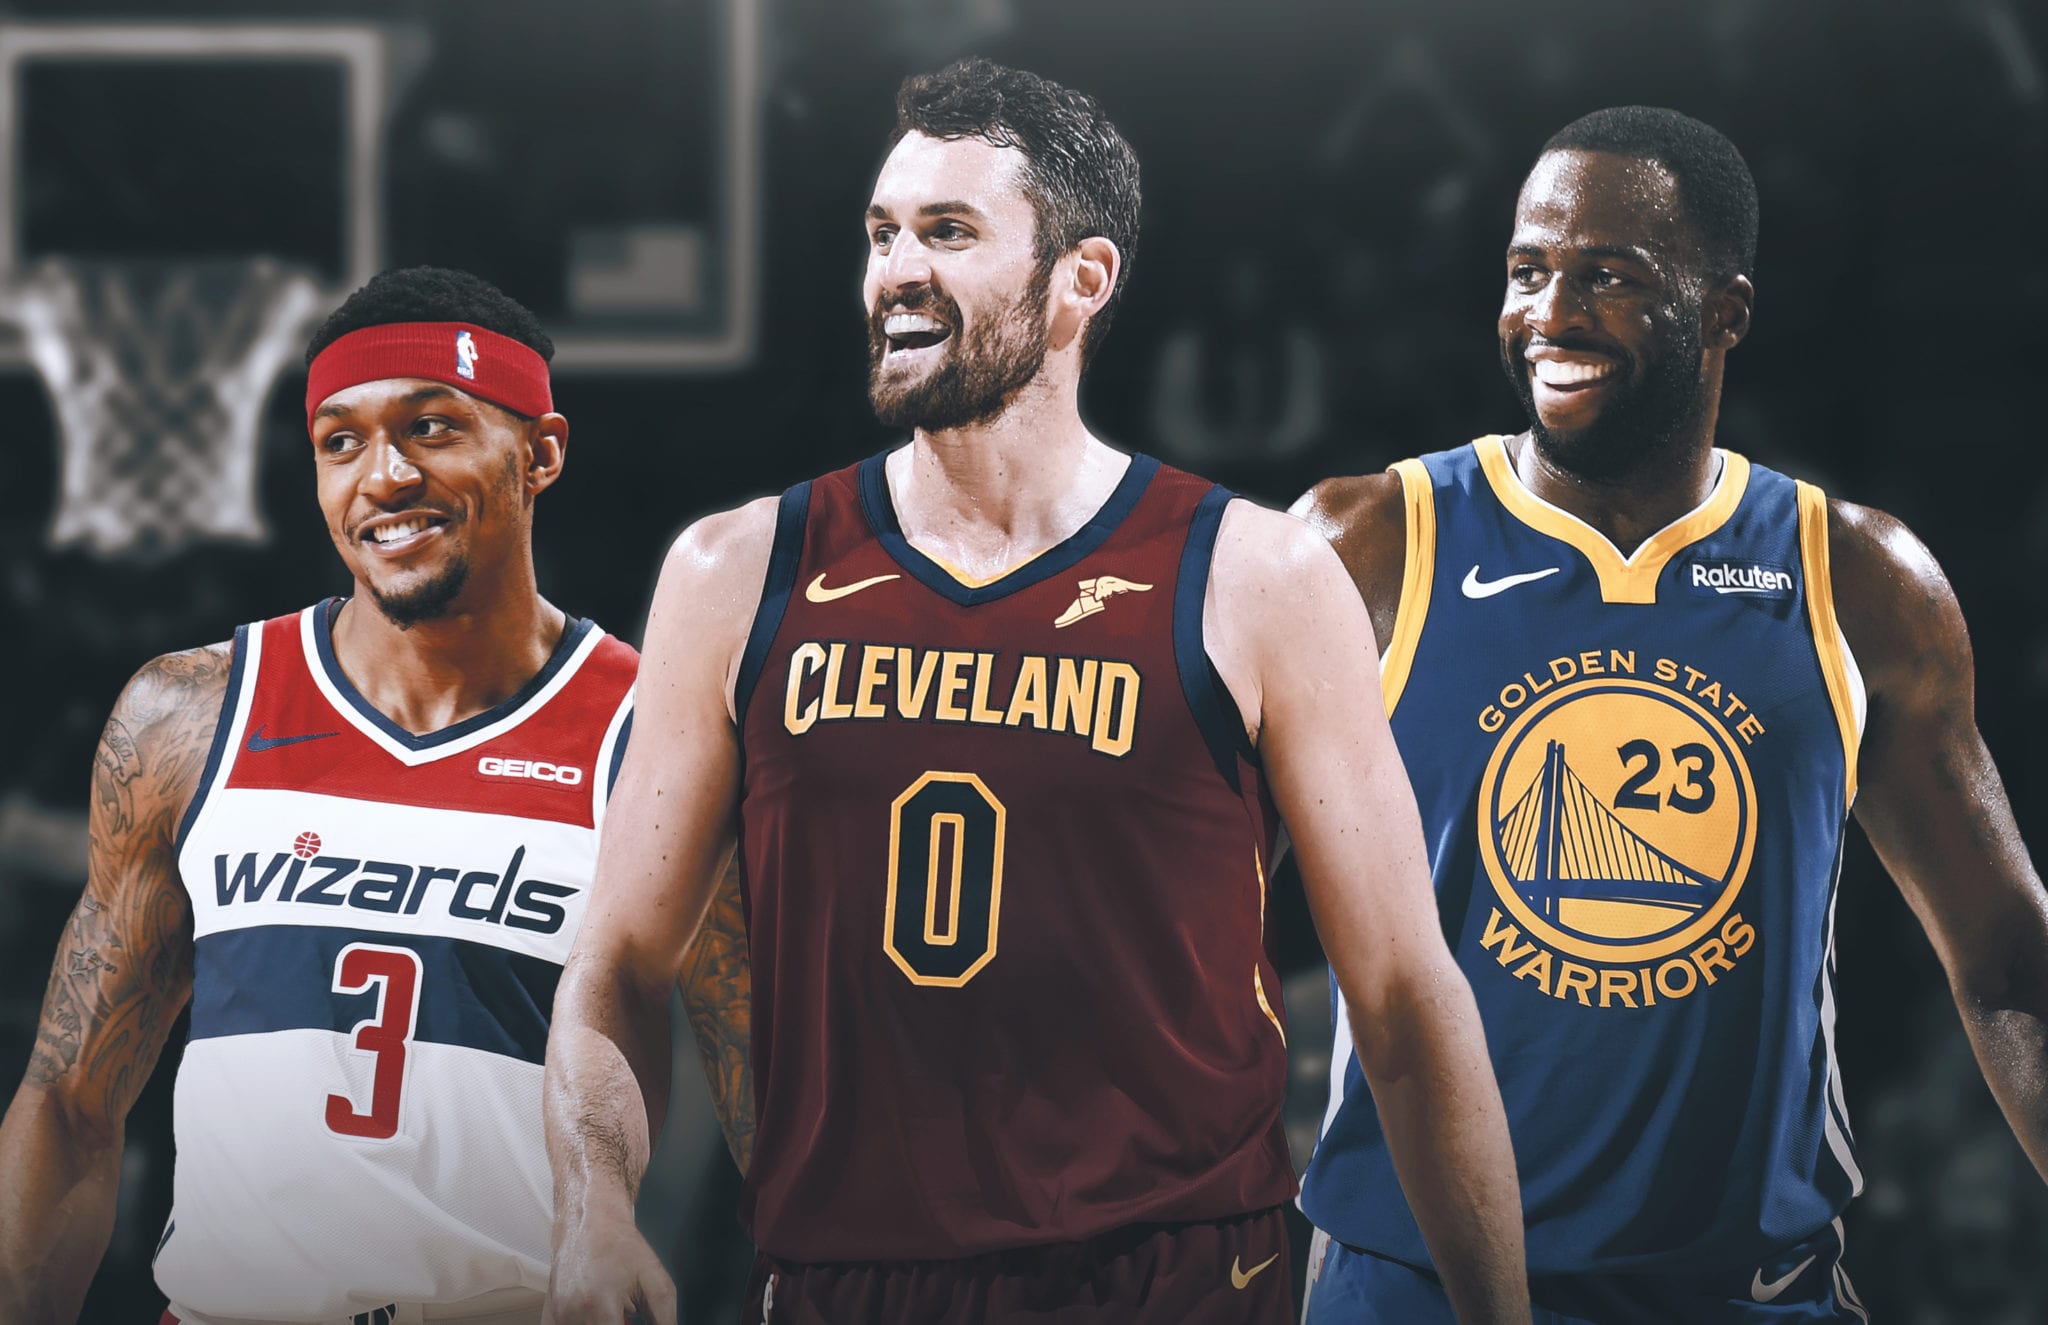 These 4 Future NBA Stars are changing the Future of Basketball Forever